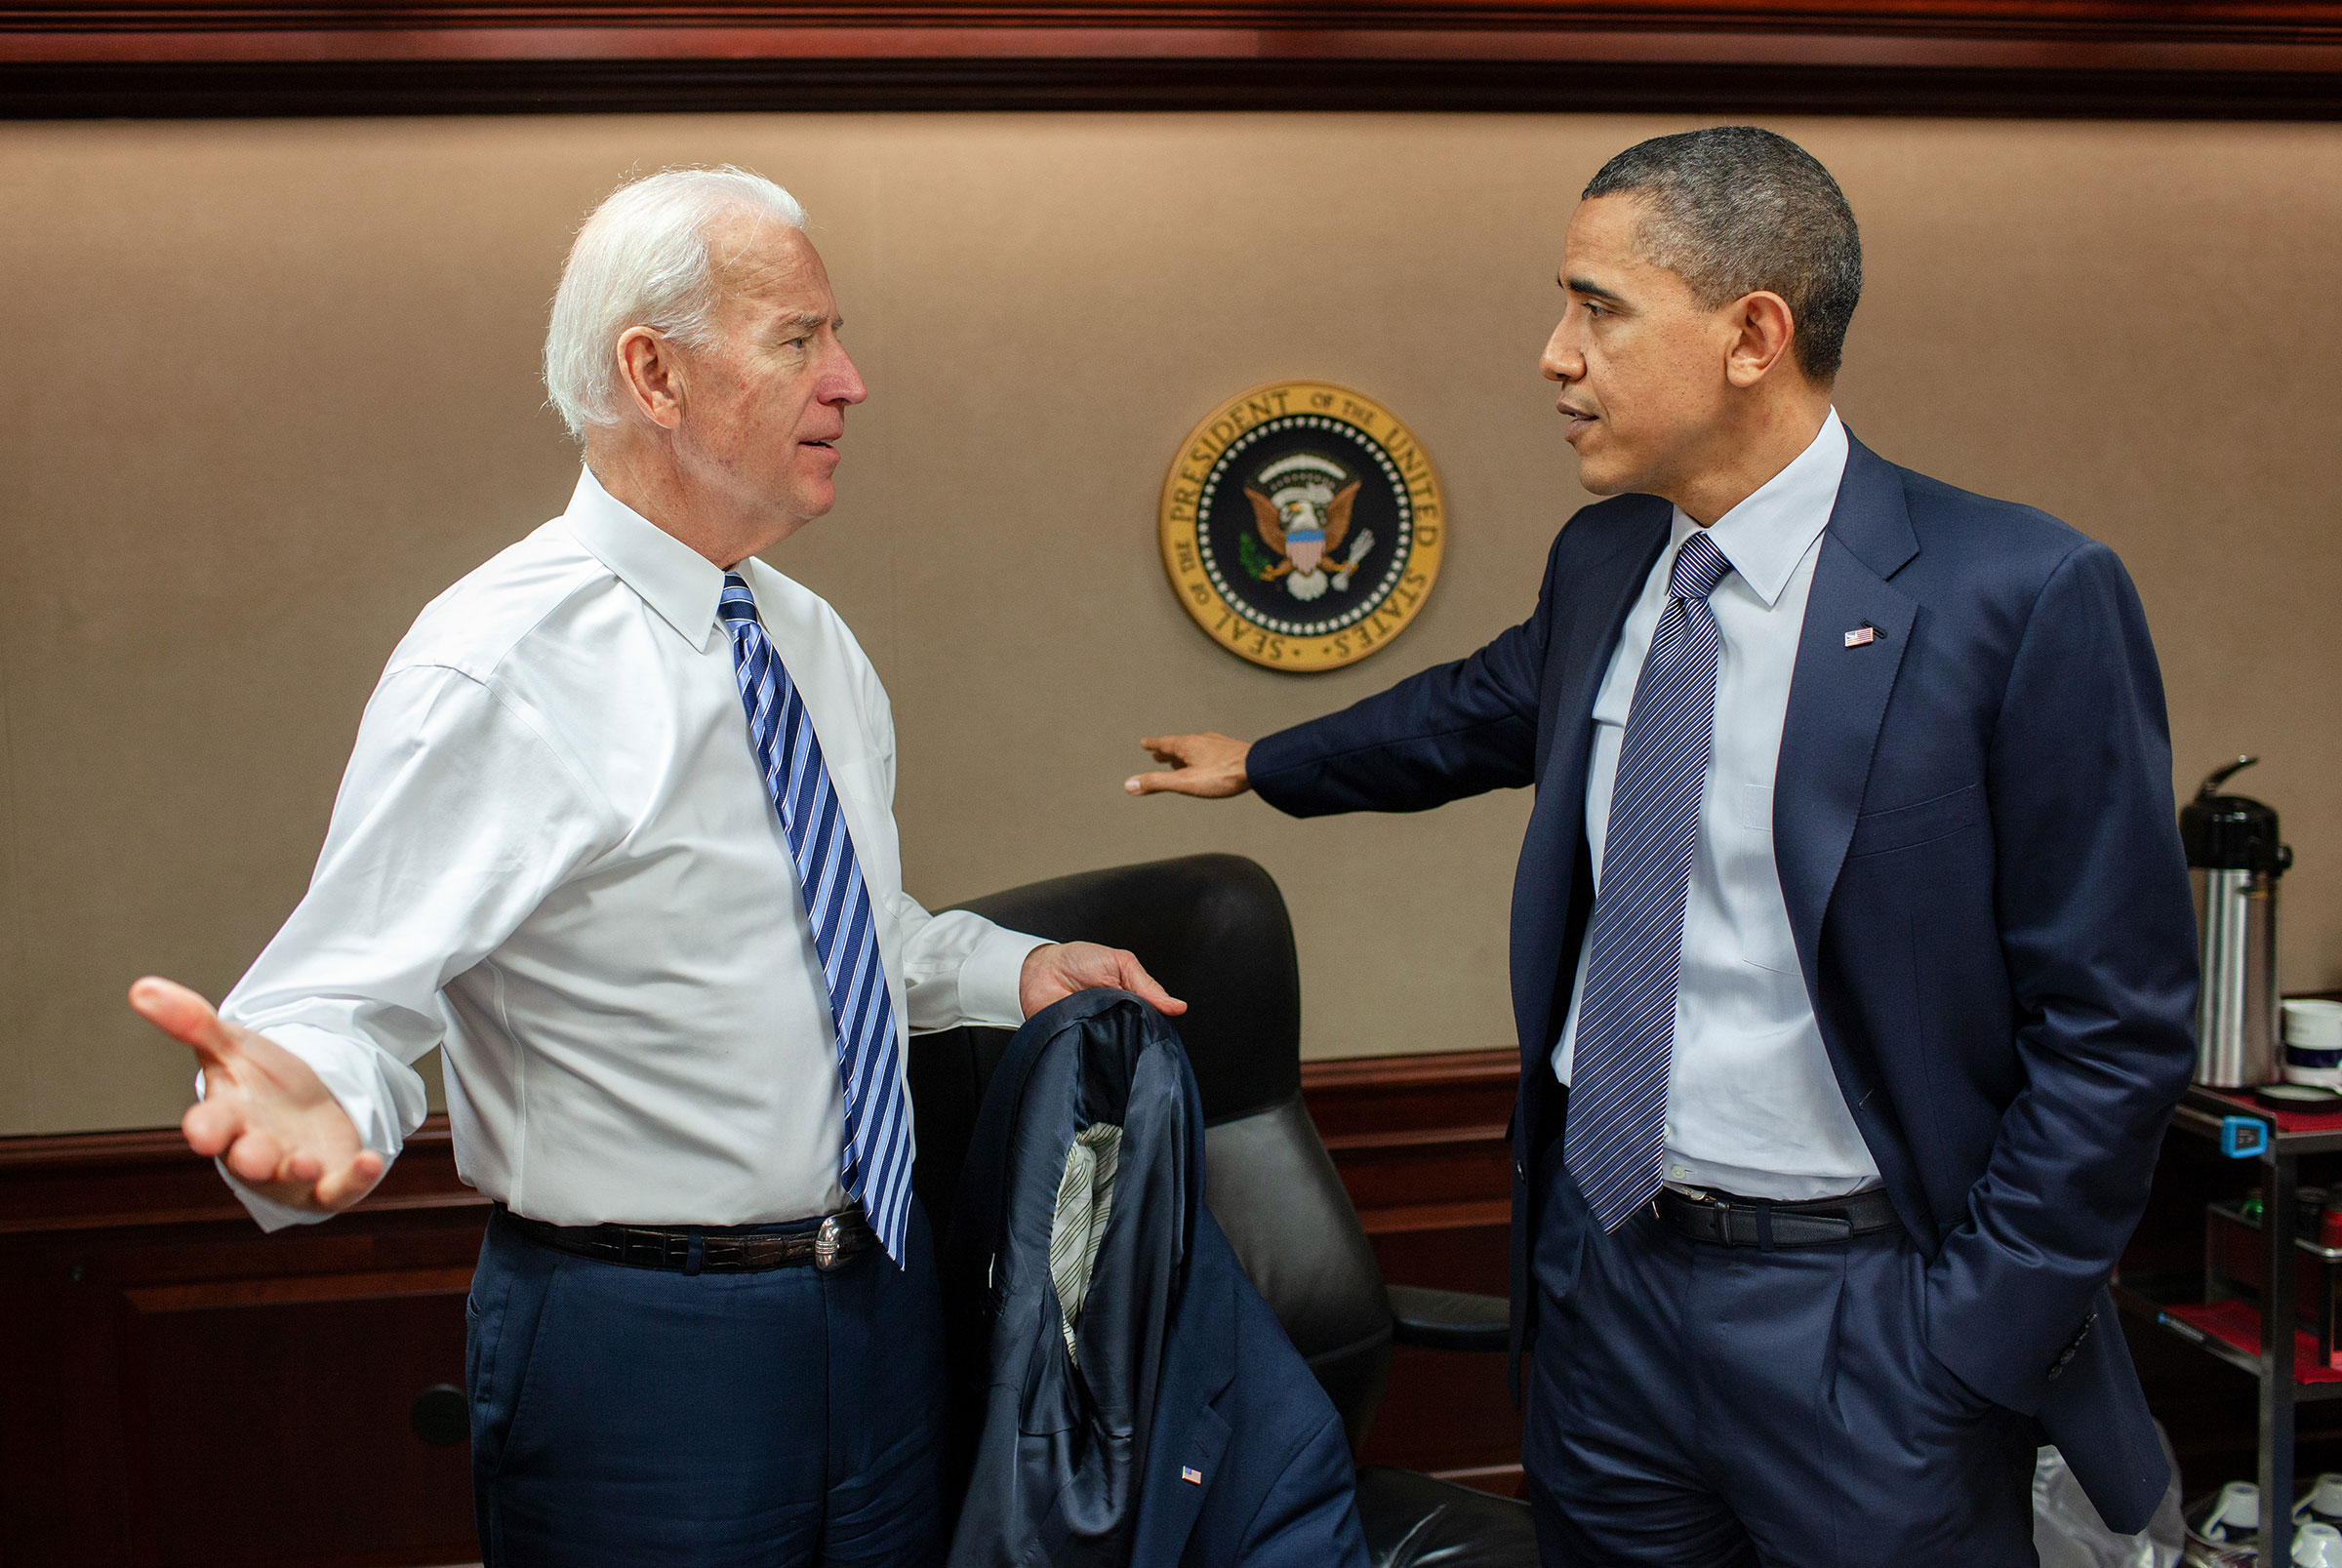 President Barack Obama, with Vice President Joe Biden, holds a secure teleconference call on Libya in the Situation Room of the White House, on April 5, 2011.